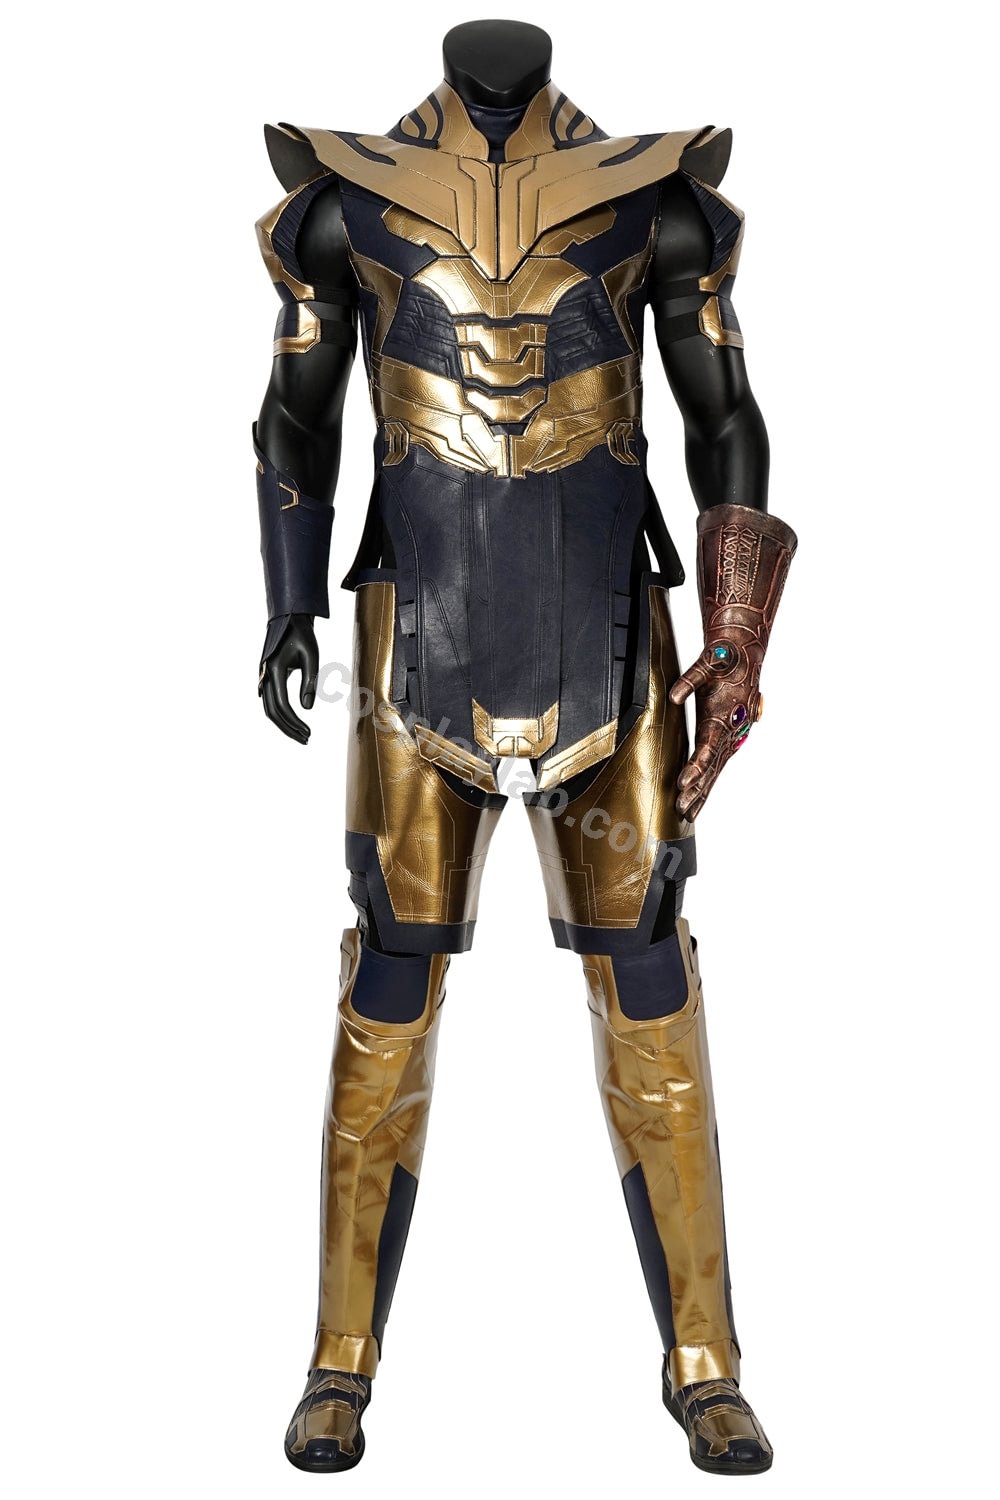 Top Level Avengers Infinity War Thanos Cosplay Costume Full Set By CosplayLab